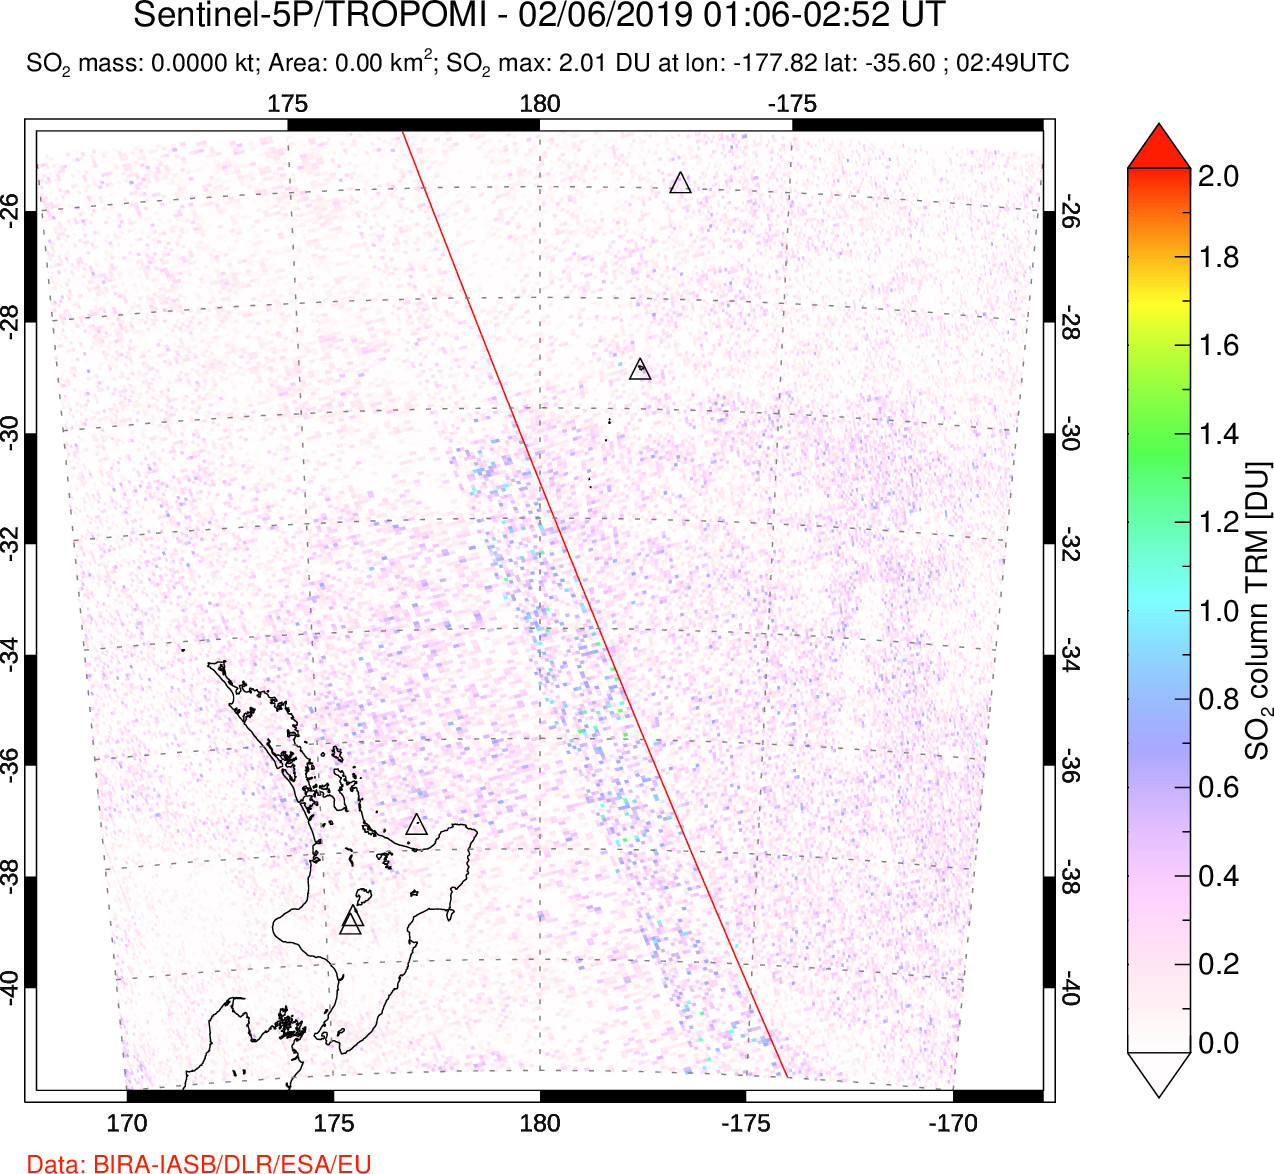 A sulfur dioxide image over New Zealand on Feb 06, 2019.